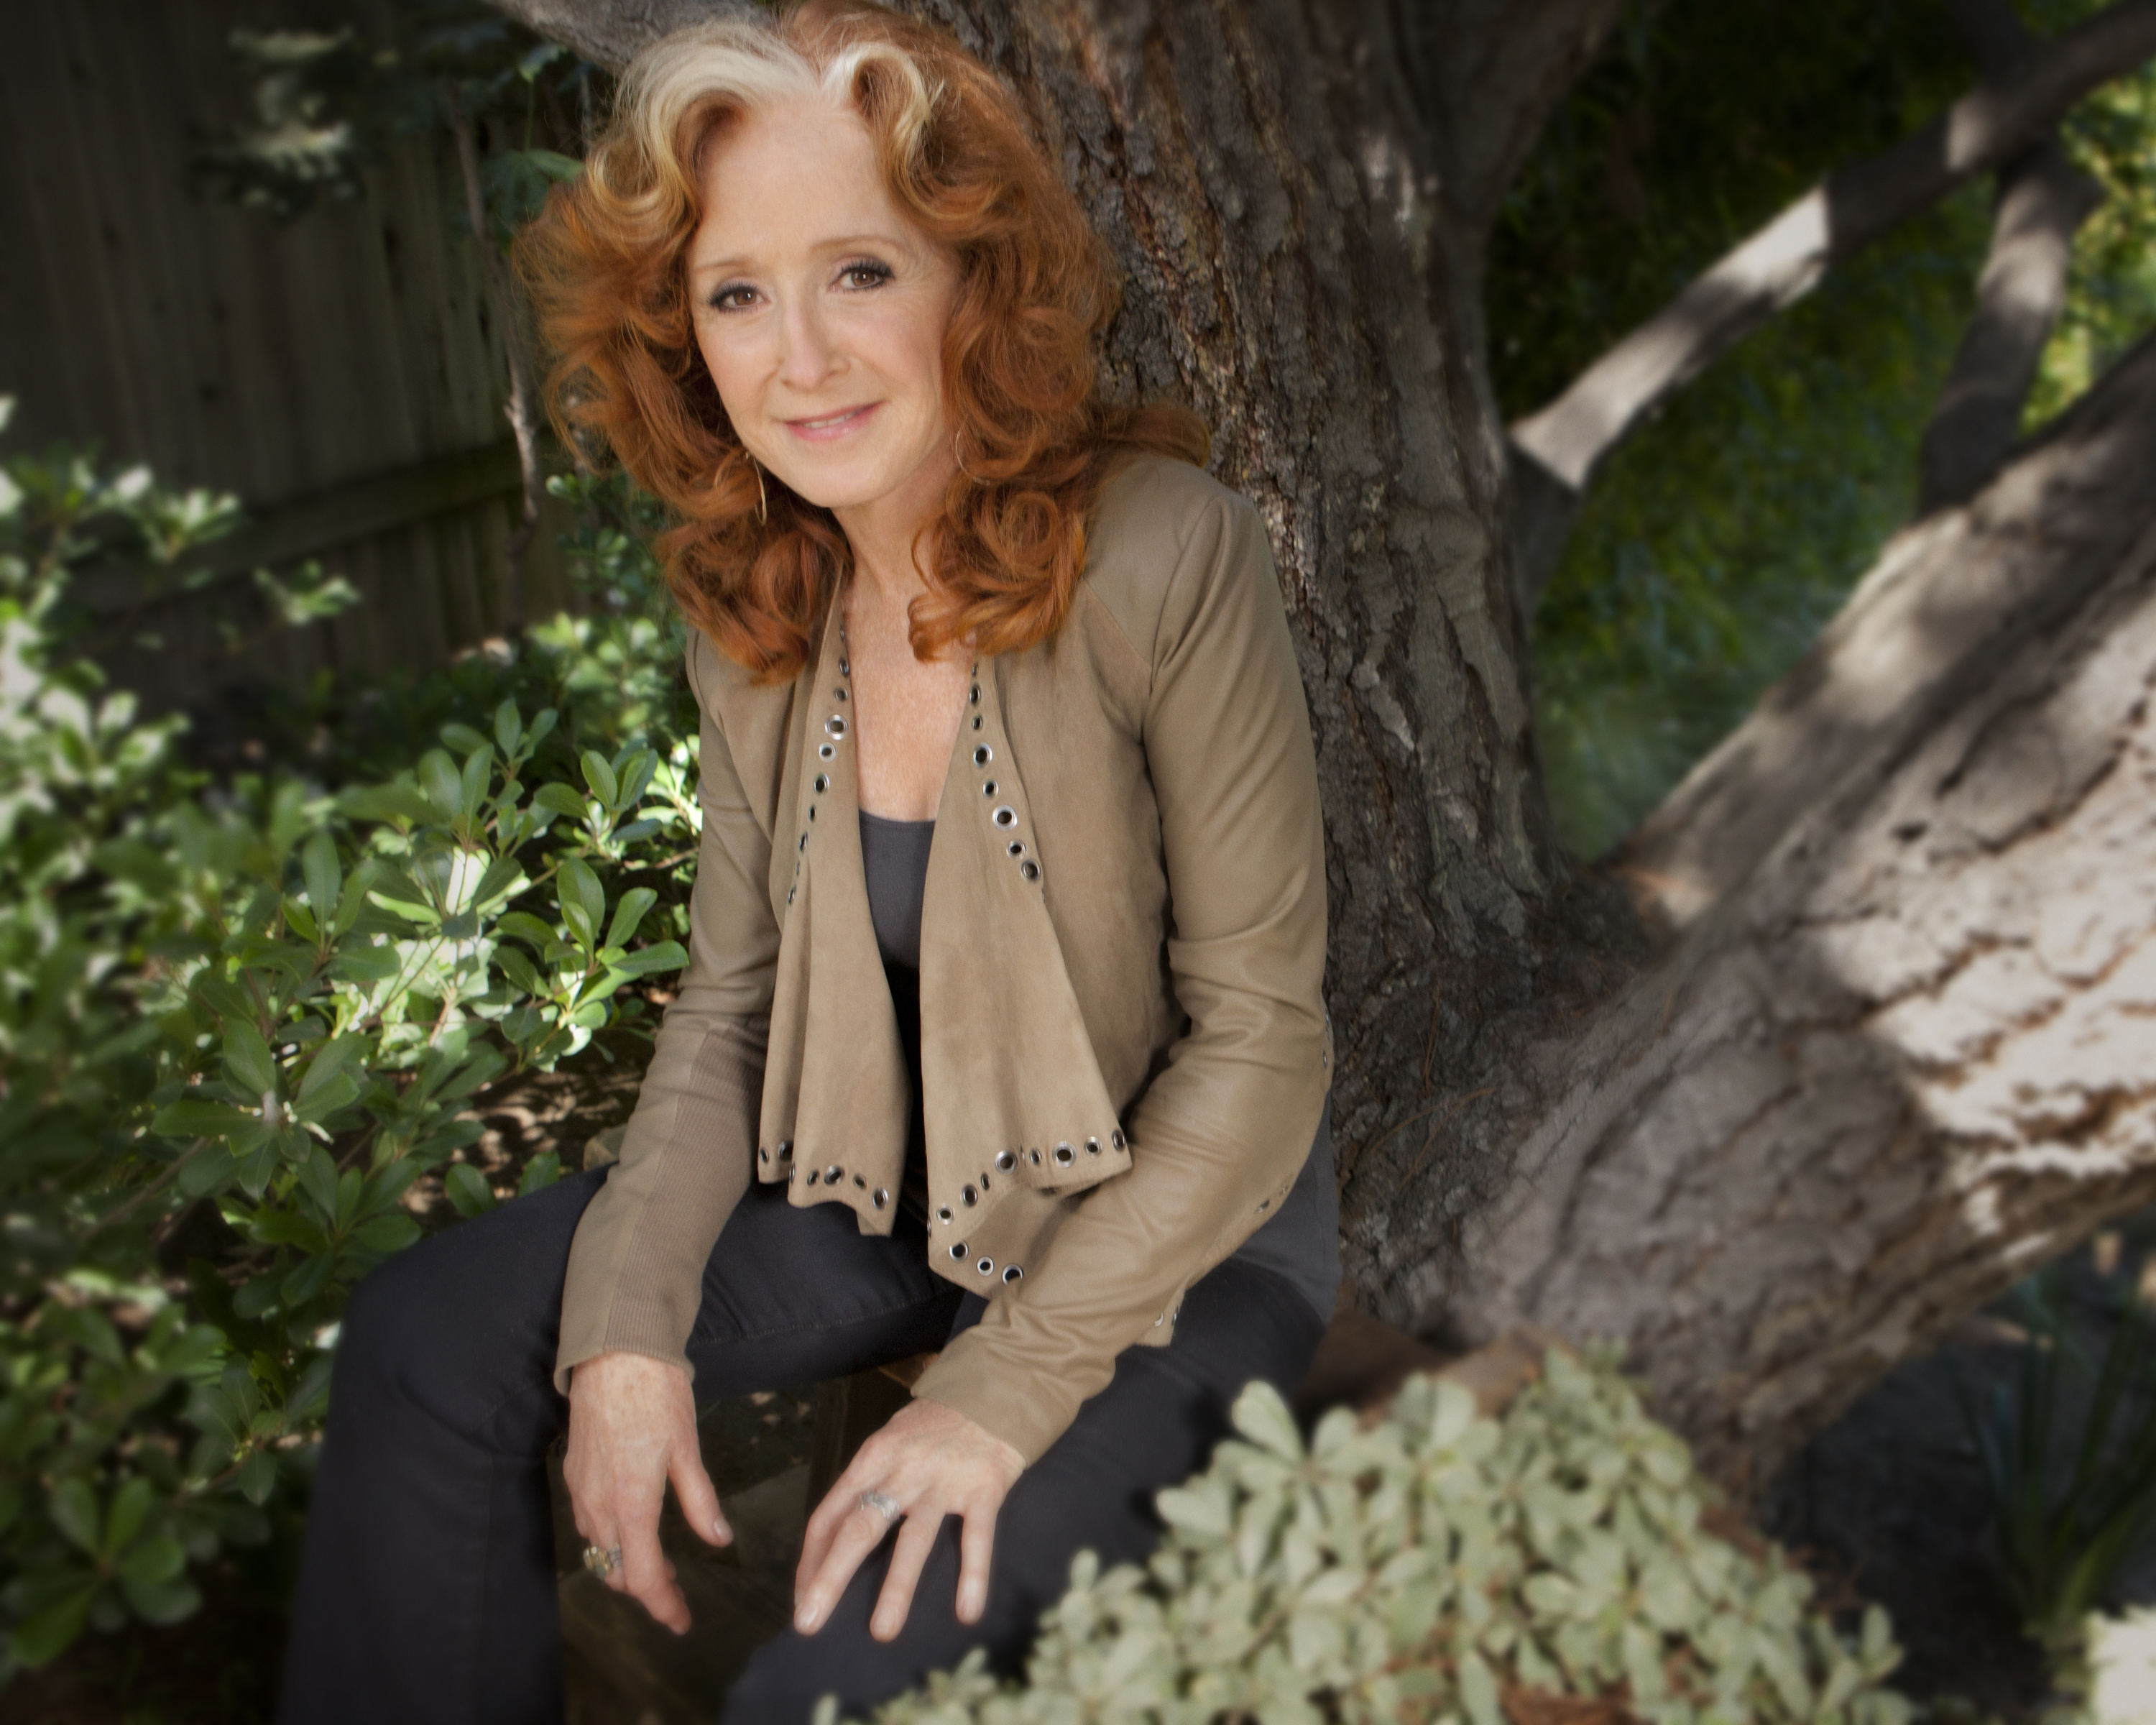 Ten-time Grammy winner Bonnie Raitt will visit Maui on her Dig in Deep tour for a concert at the Maui Arts & Cultural Center’s A&B Amphitheater & Yokouchi Pavilion Friday, March 24. Courtesy image.